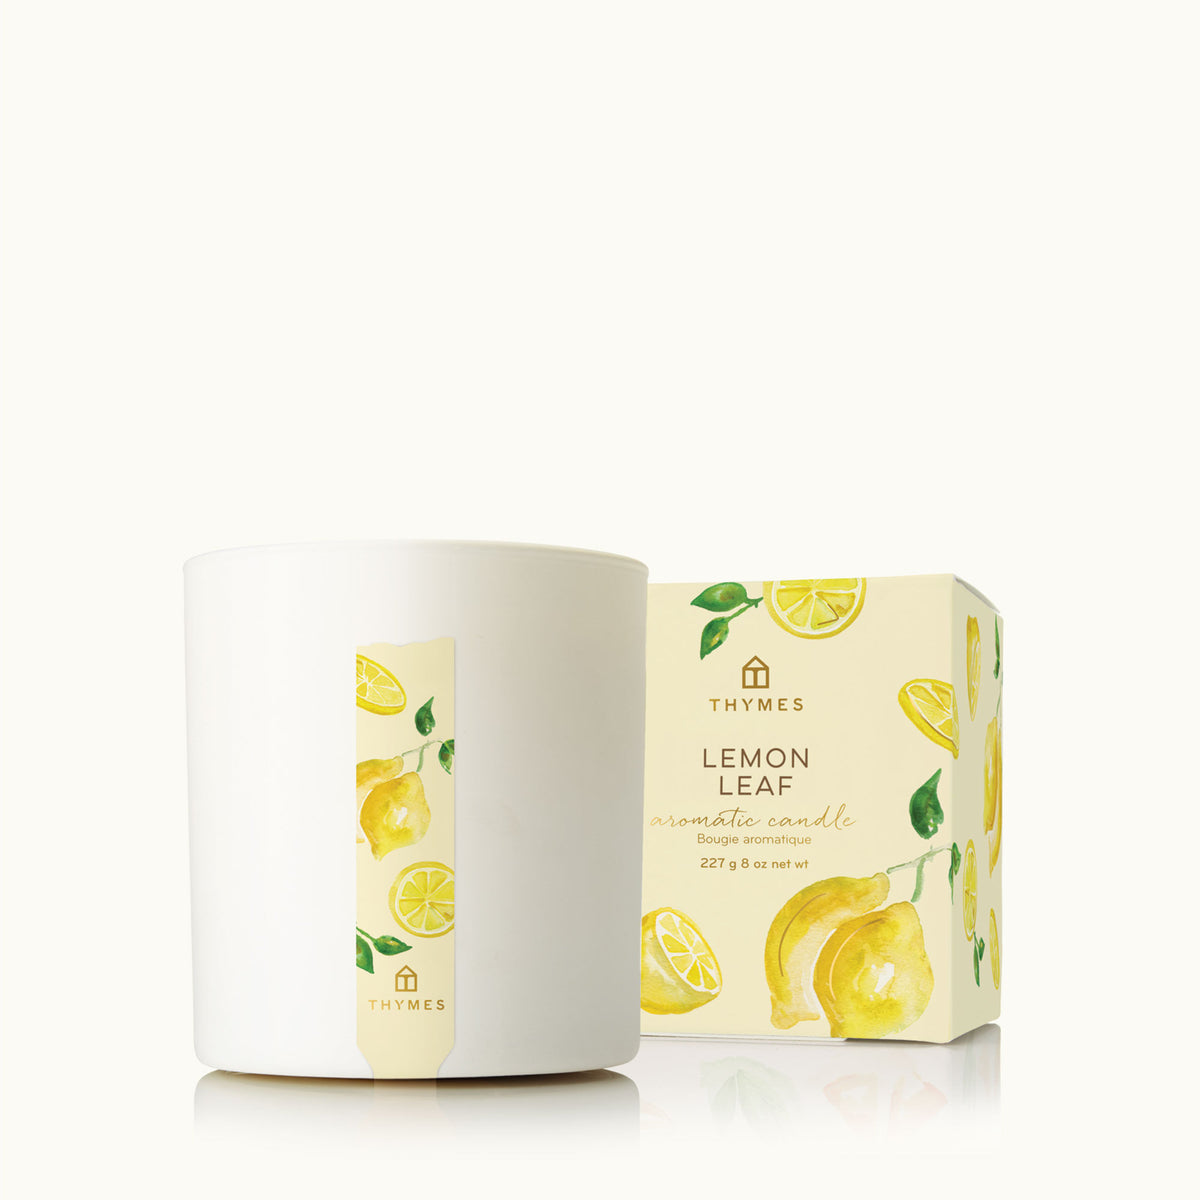 Thymes Lemon Leaf Aromatic Poured Soy Wax Candle 227g 8oz